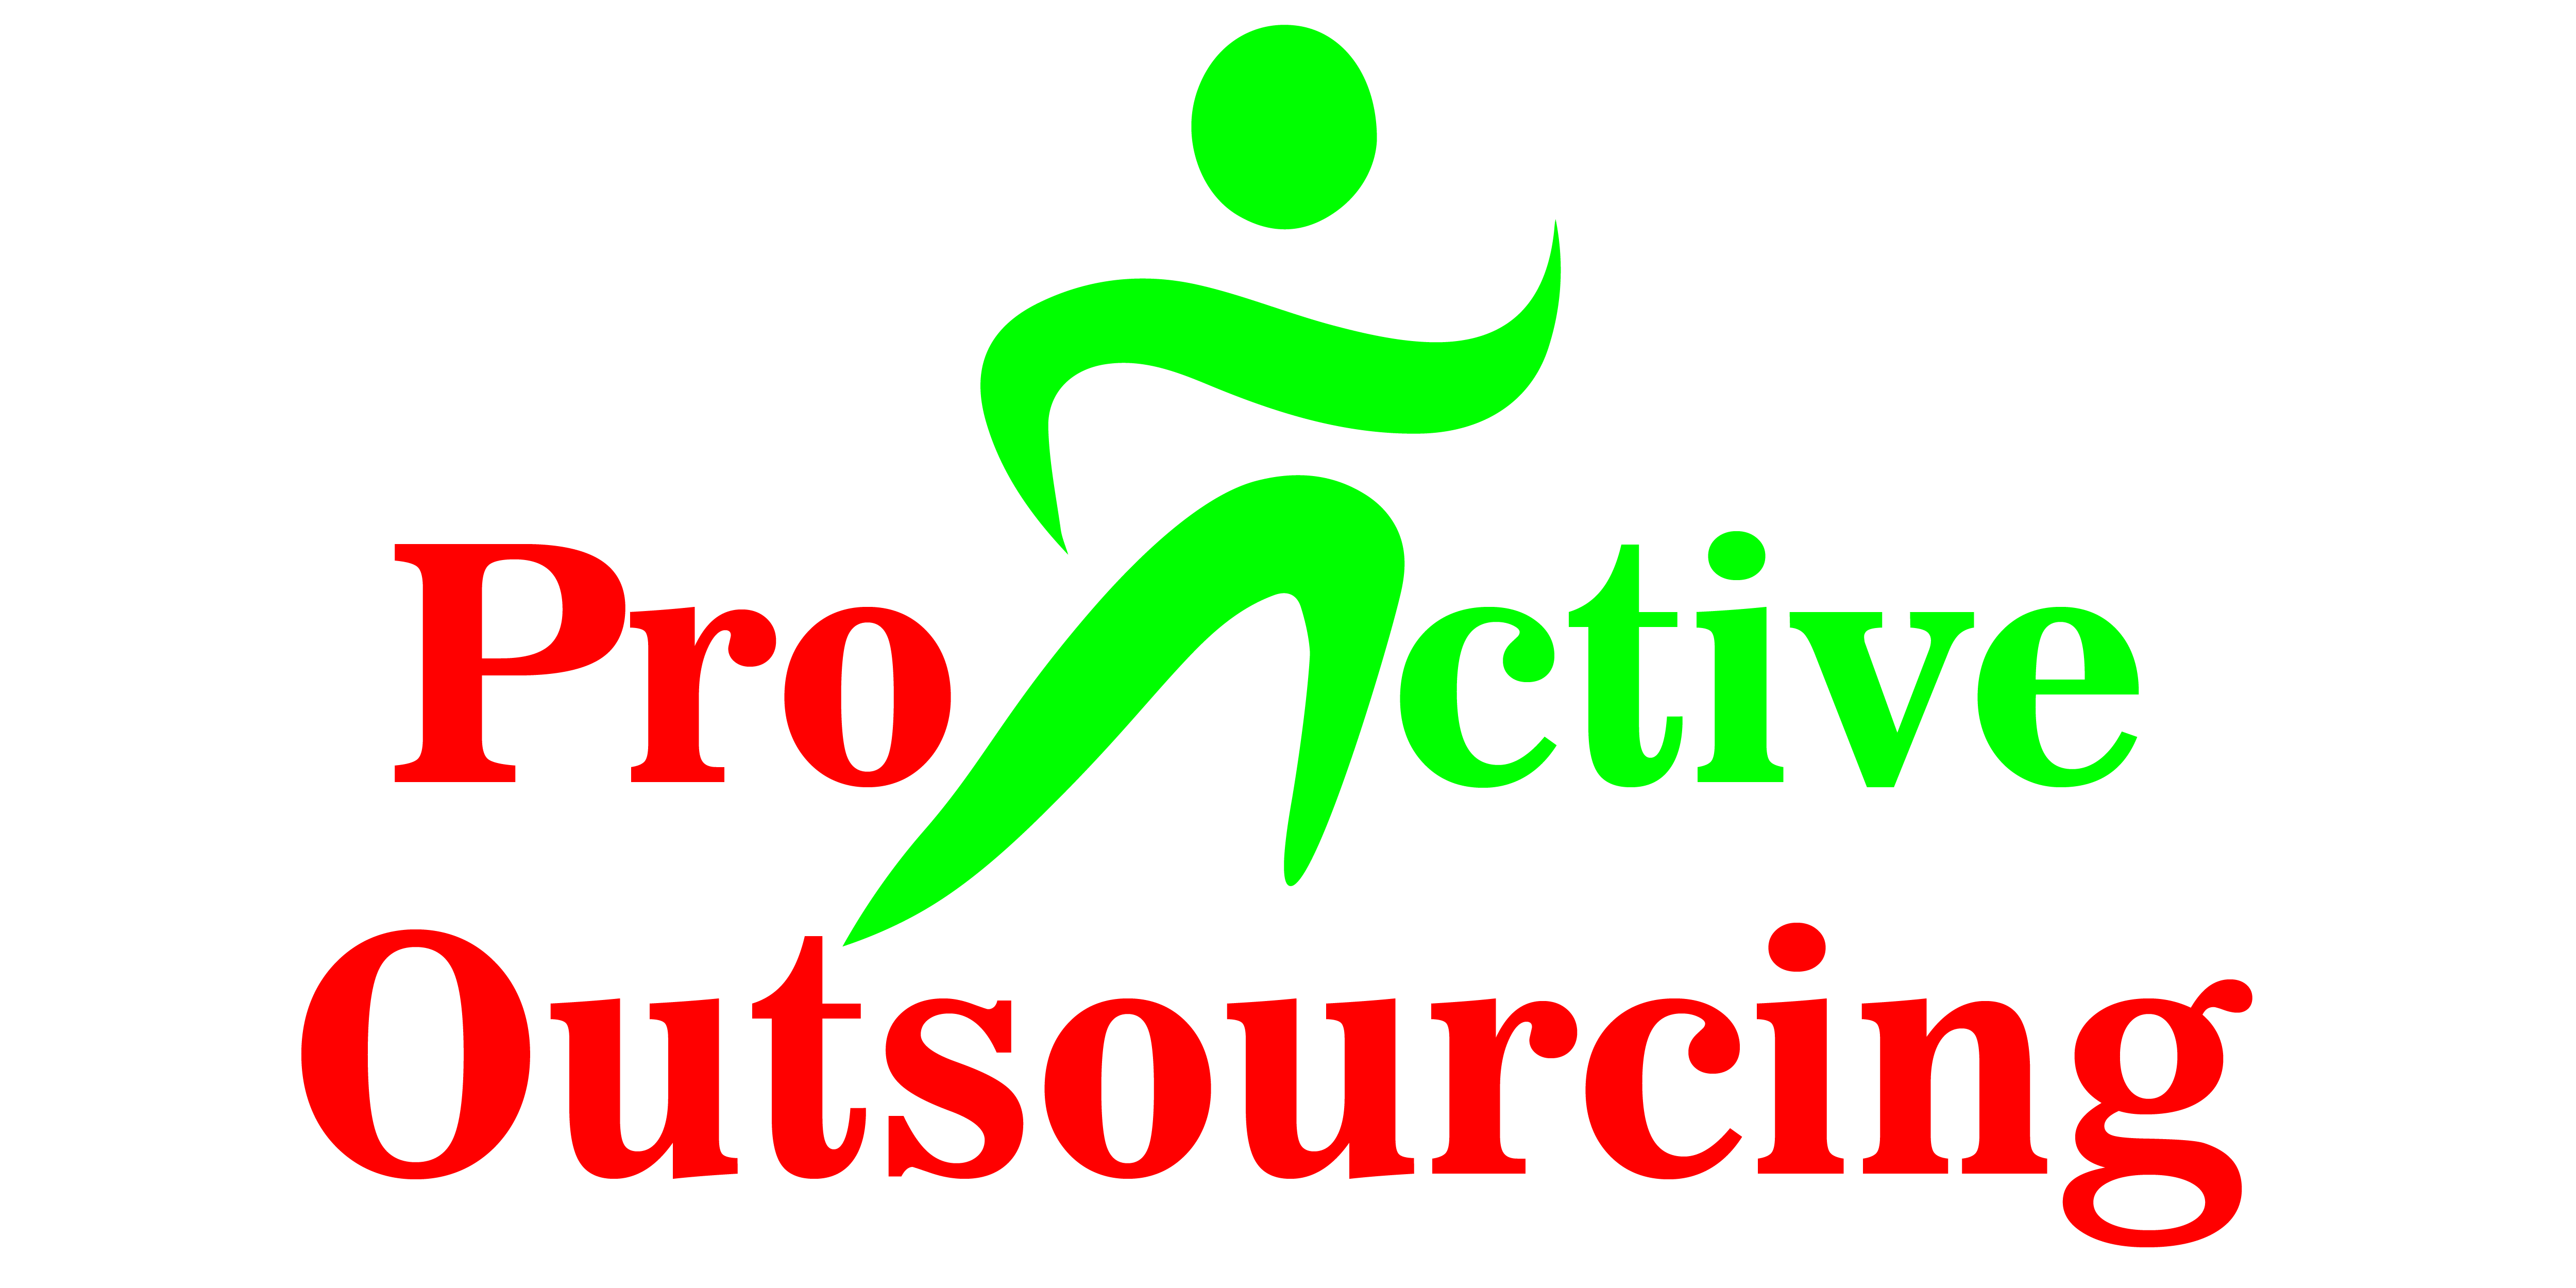 ProActive Outsourcing